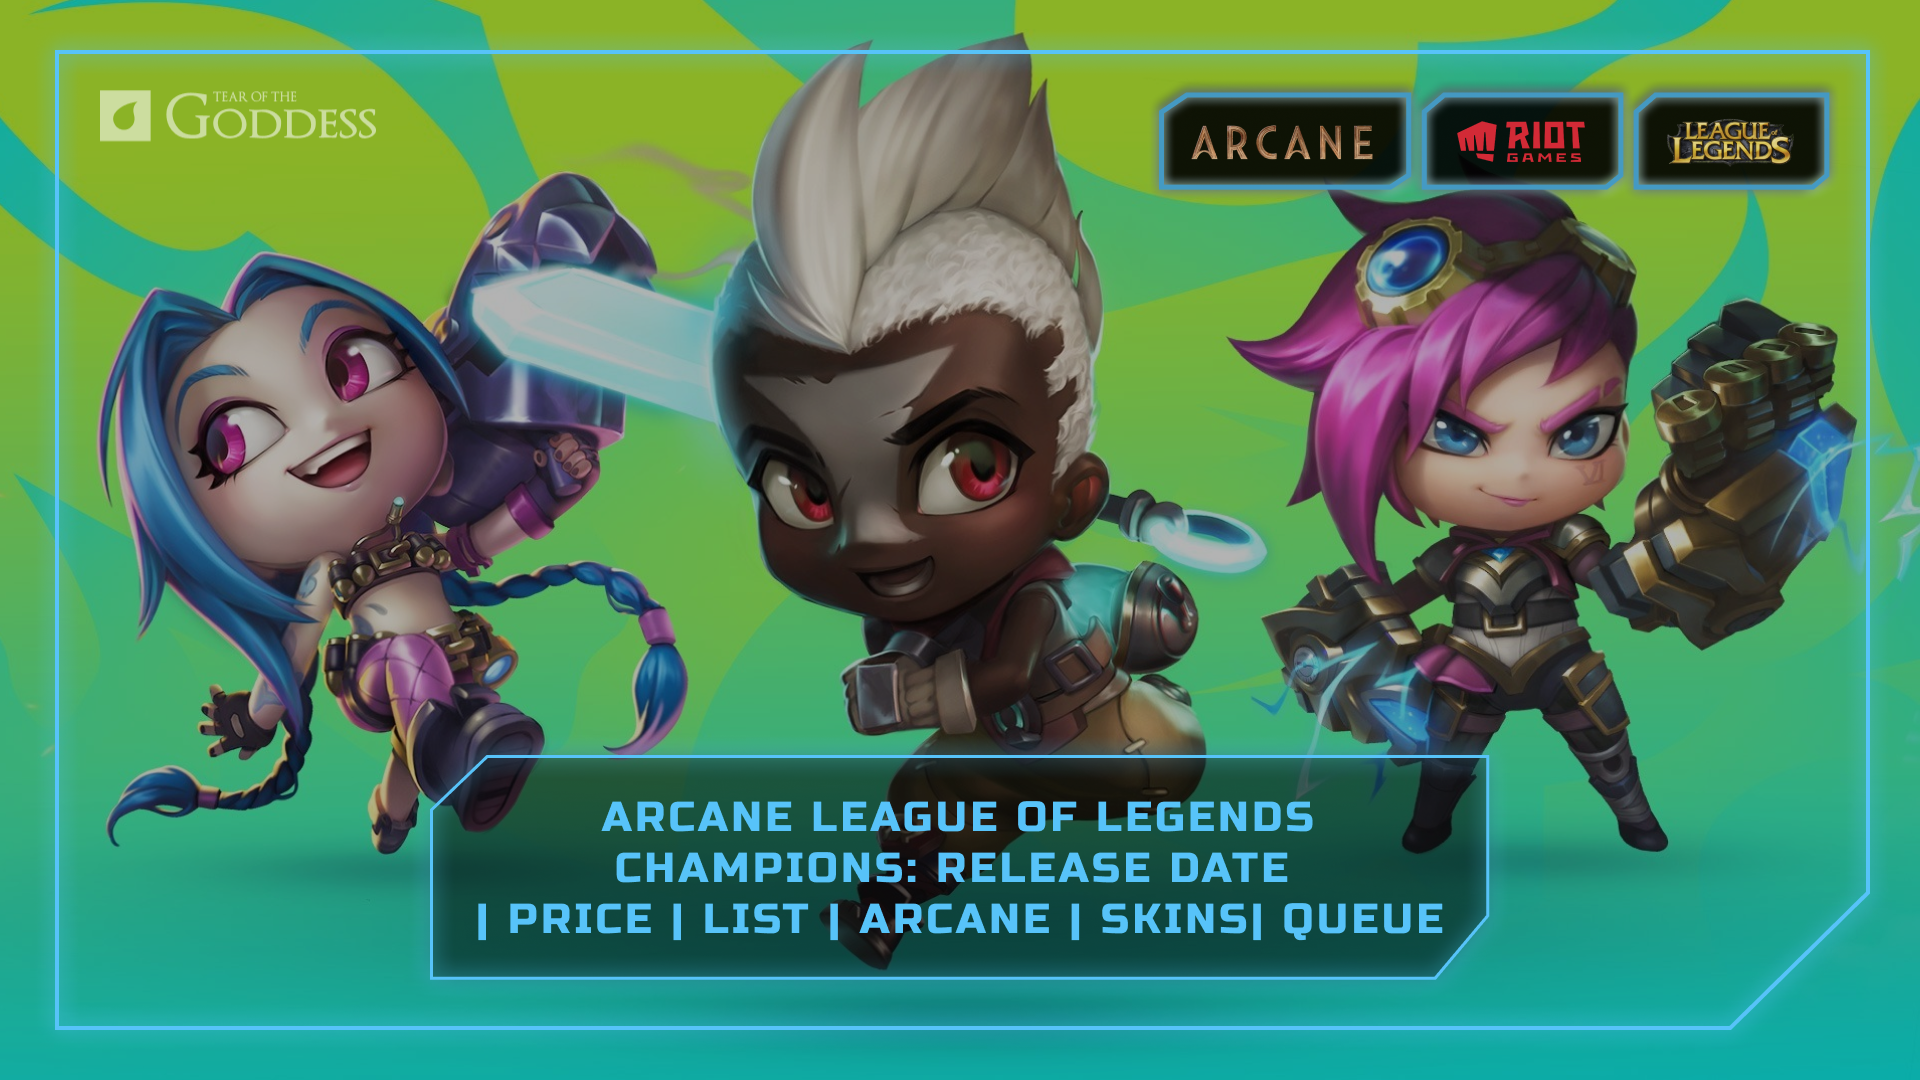 Arcane League of Legends Champions LoL Champions Release Date Price